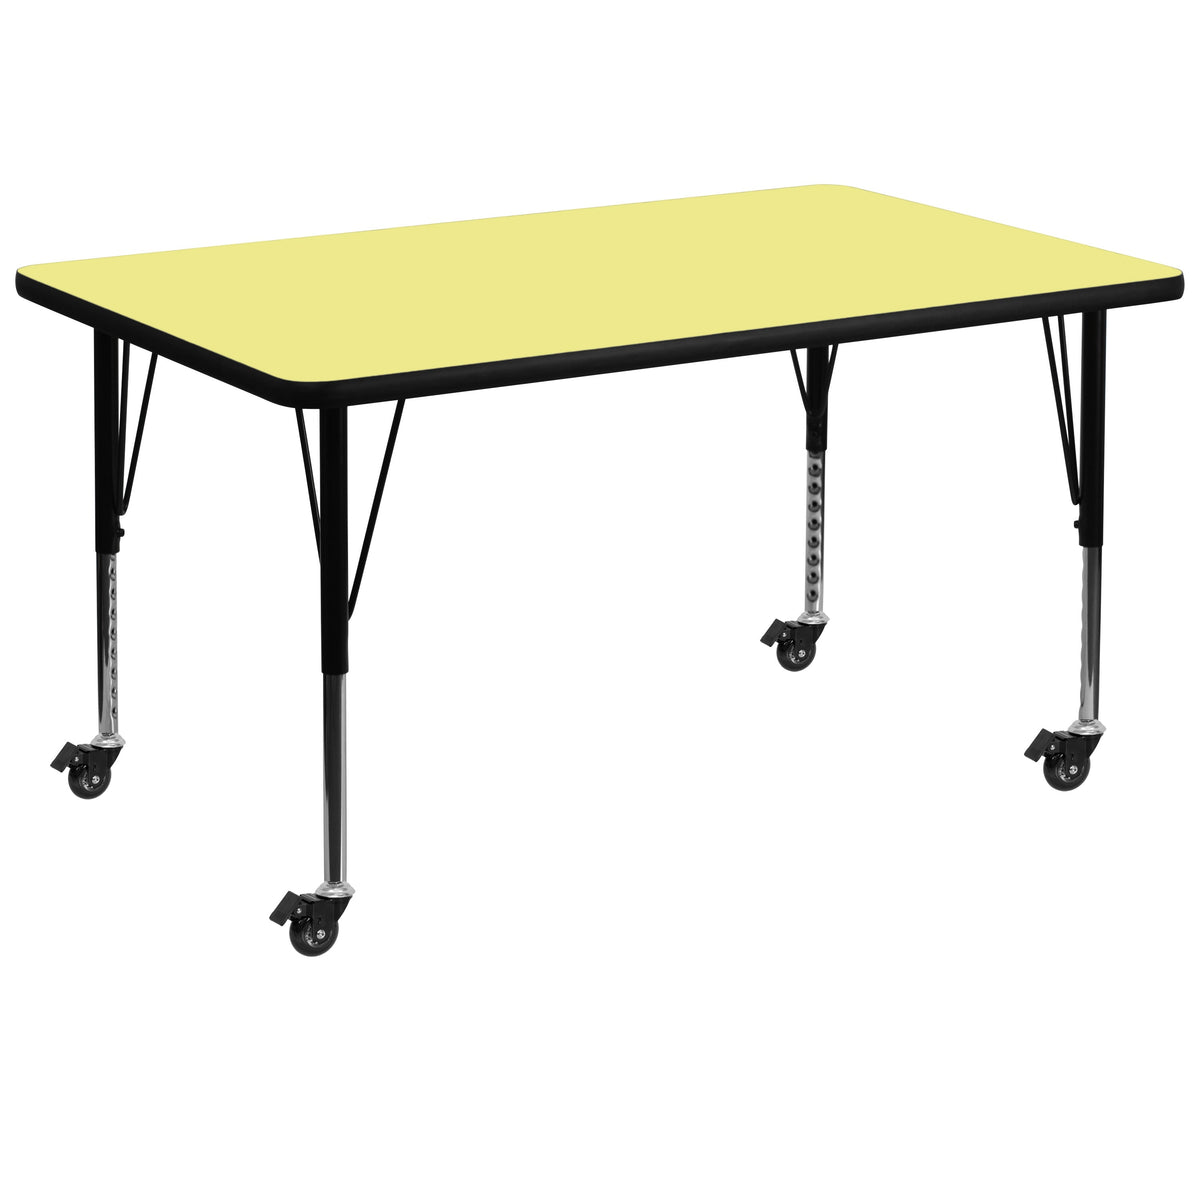 Yellow |#| Mobile 36inchW x 72inchL Rectangular Yellow Thermal Laminate Adjustable Activity Table